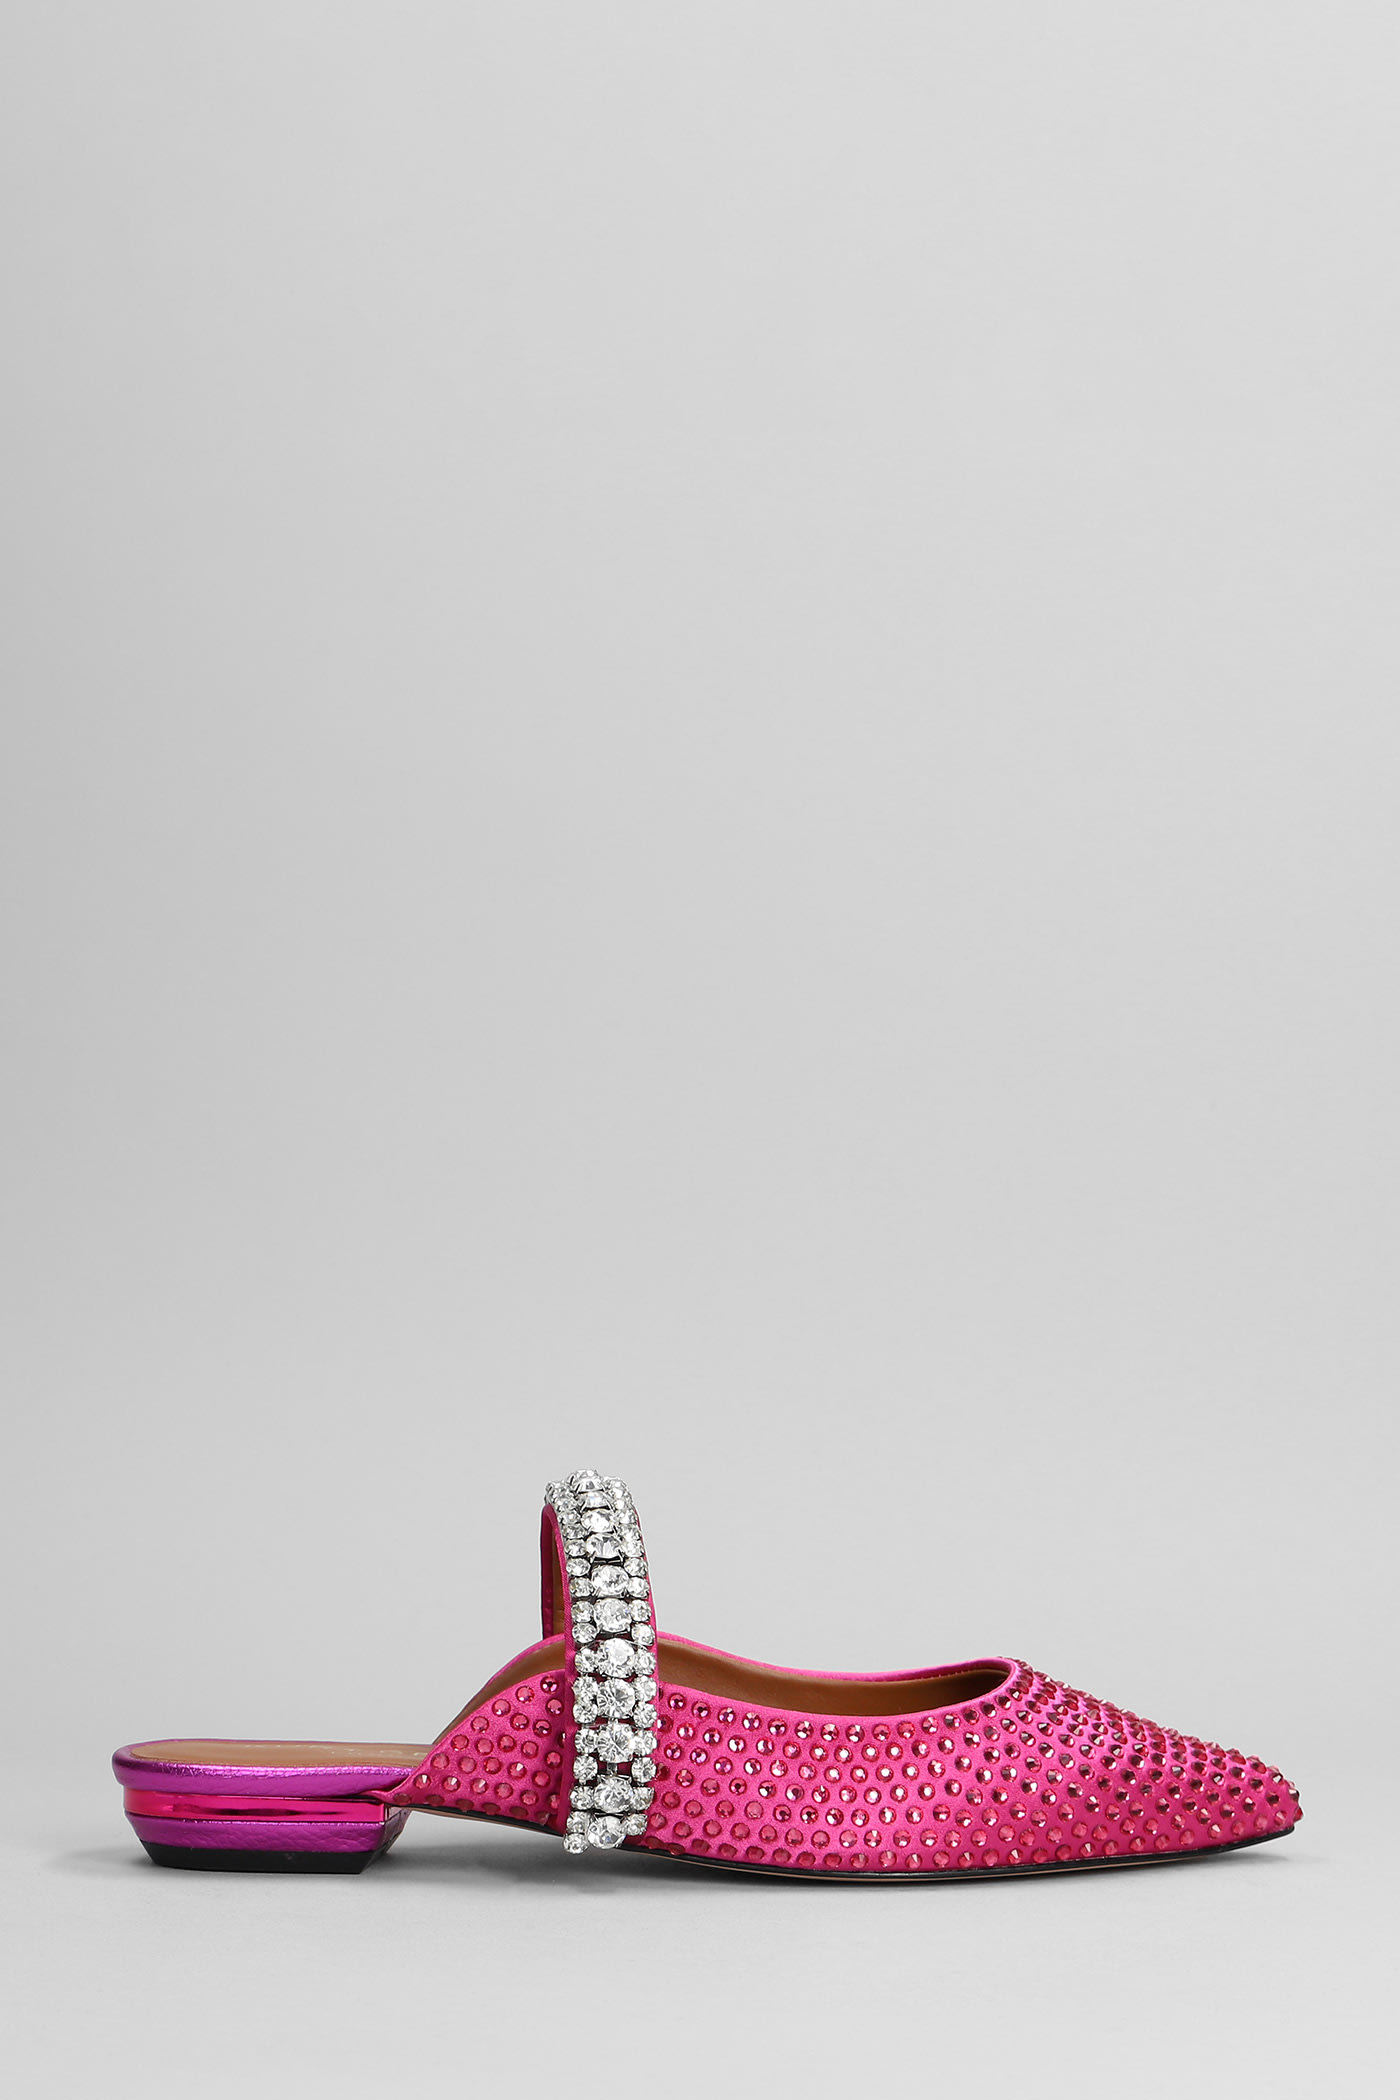 Kurt Geiger Princely Crystals Flats In Fuxia Satin